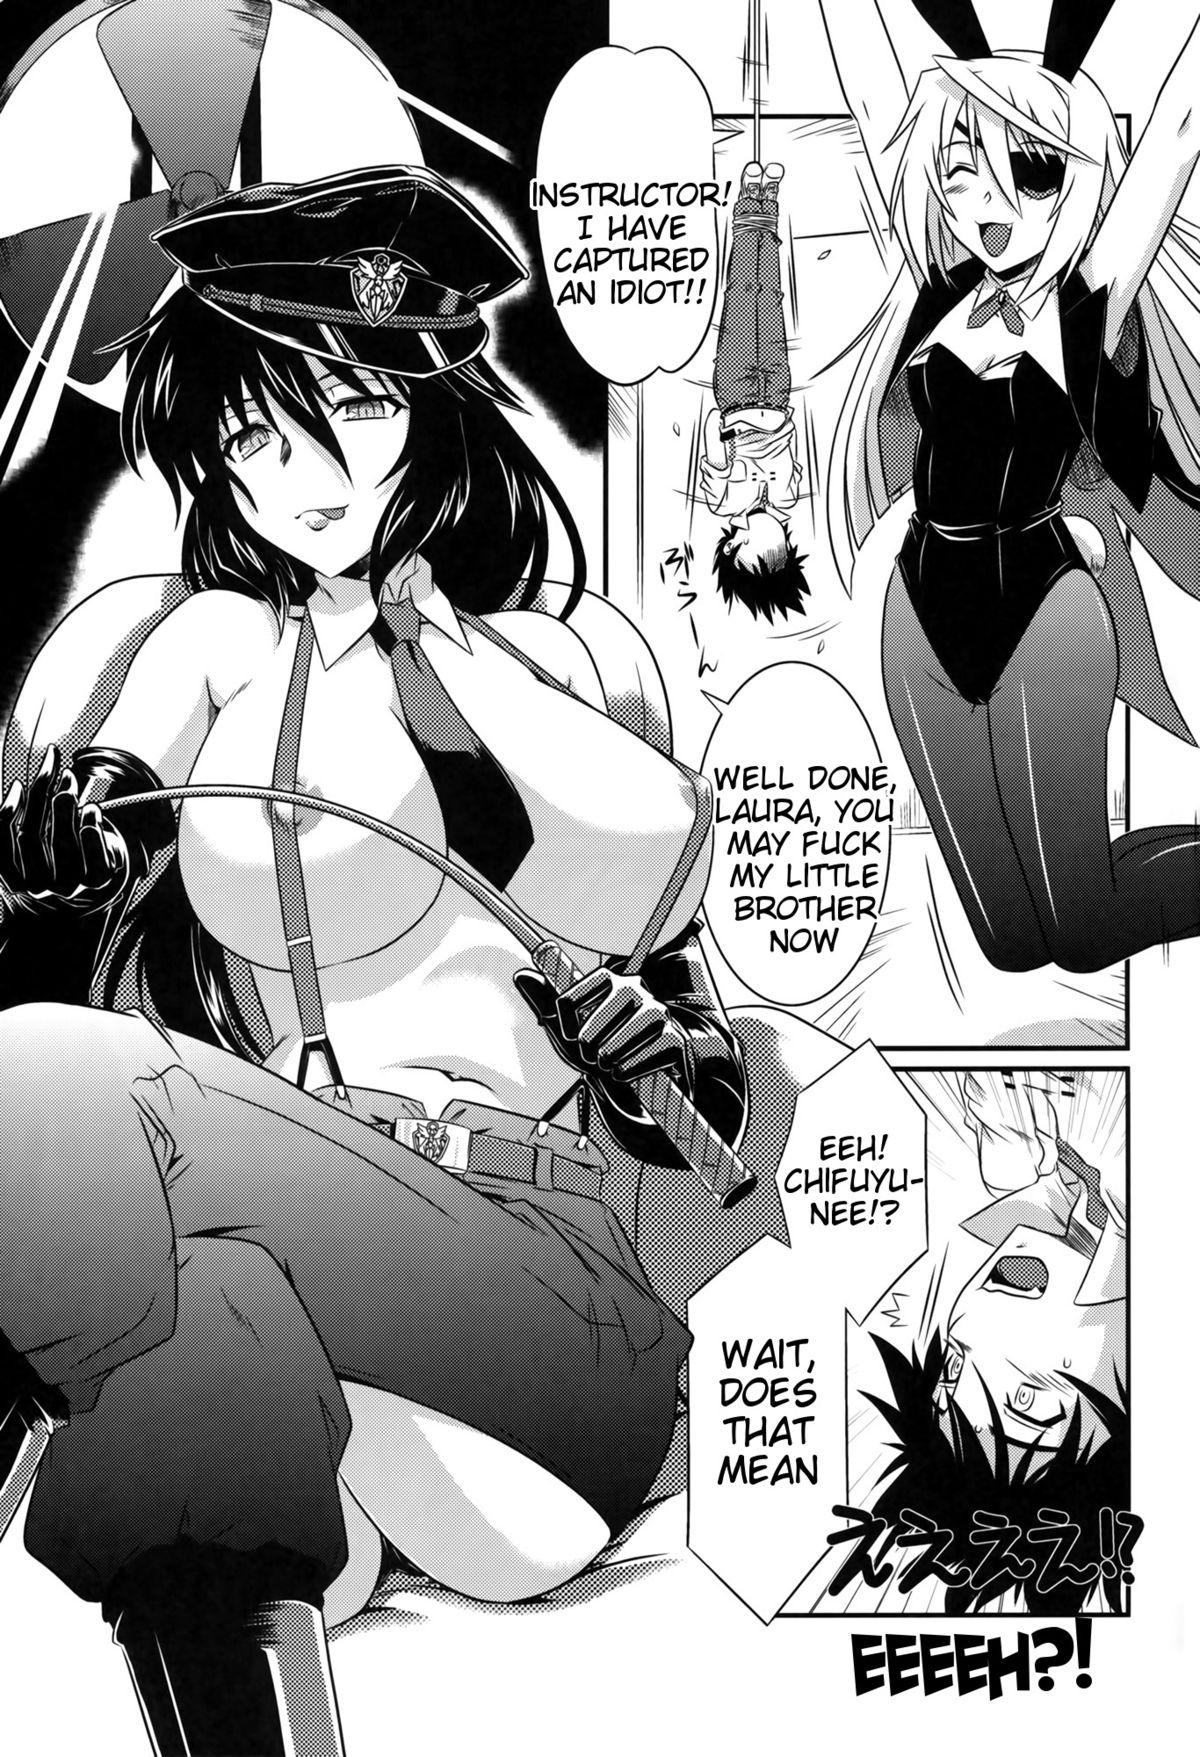 Hardcore is Incest Strategy 4 - Infinite stratos Negao - Page 5